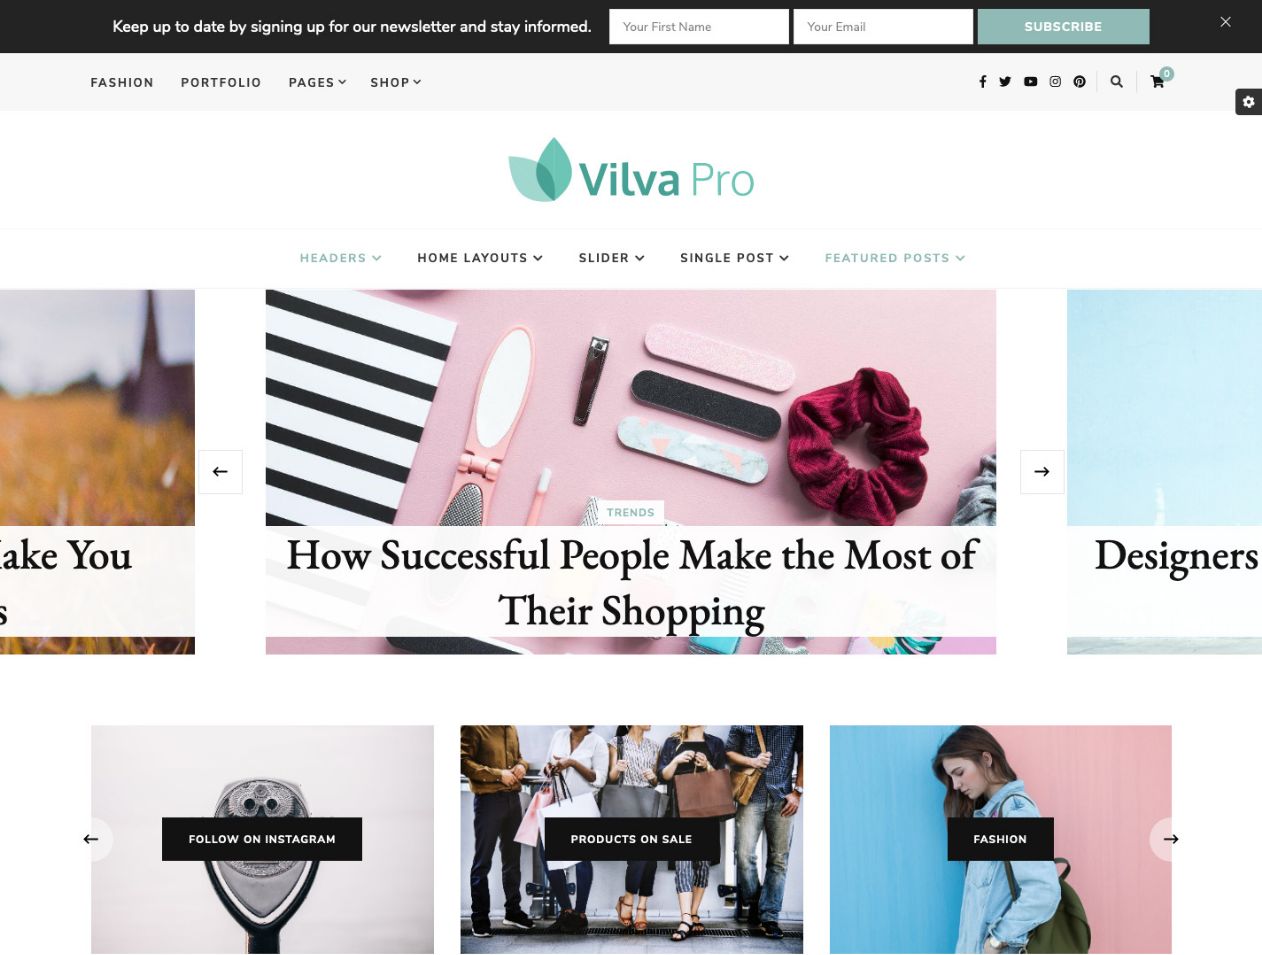 Vilva Pro’s chic and trendy design makes it a good choice for fashion and lifestyle magazines